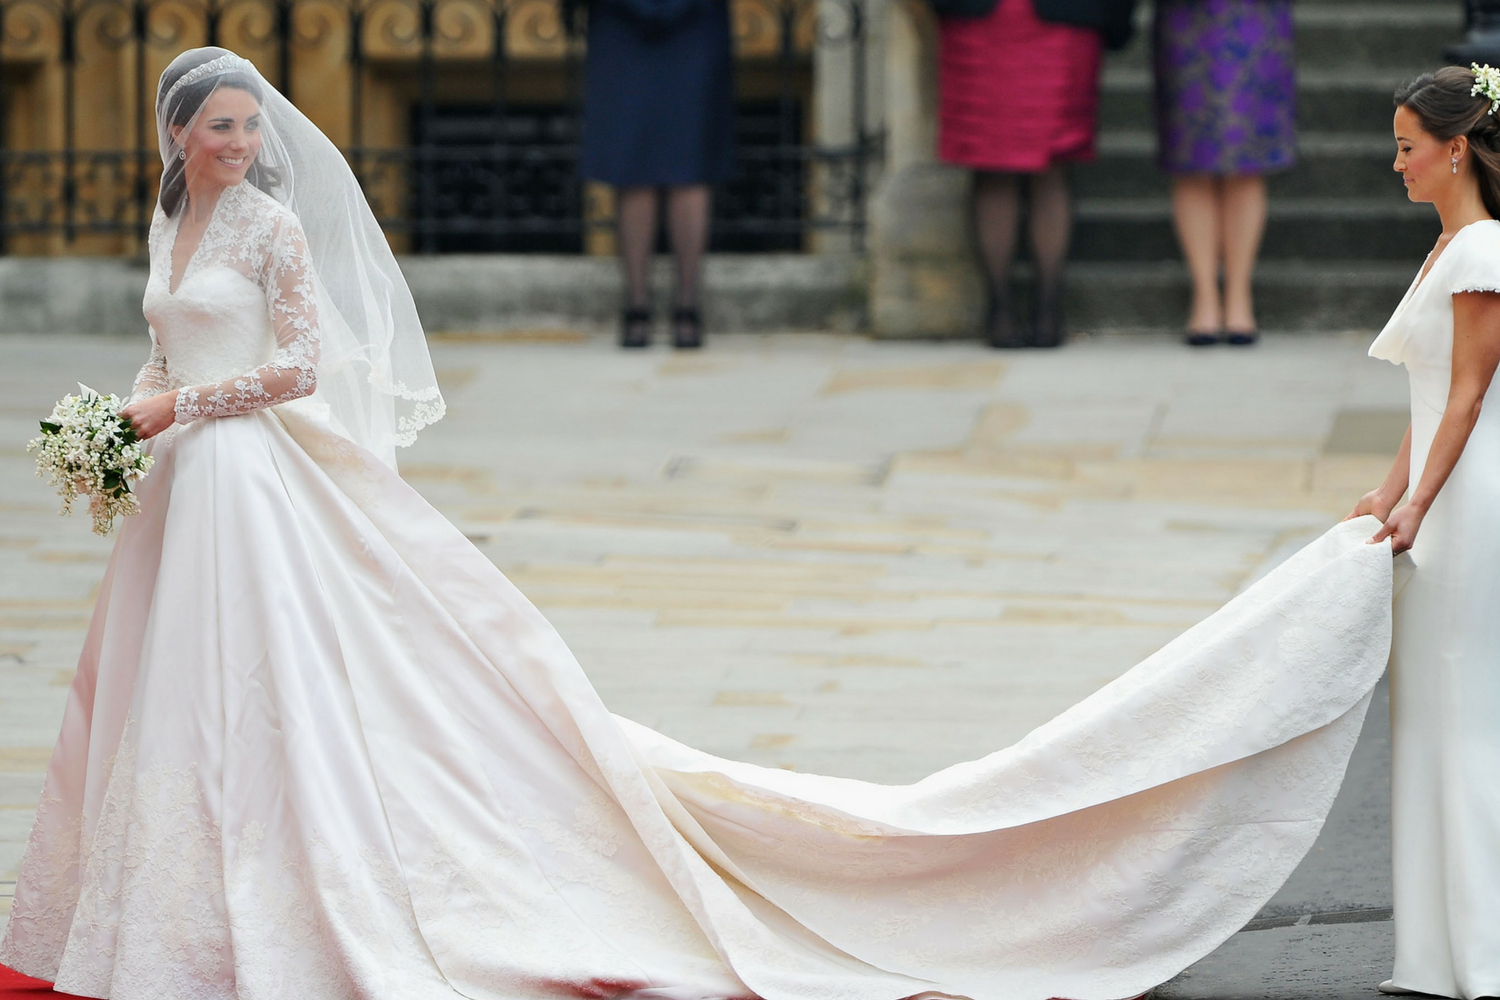 The Most Beautiful Royal Wedding Dresses Of All Time